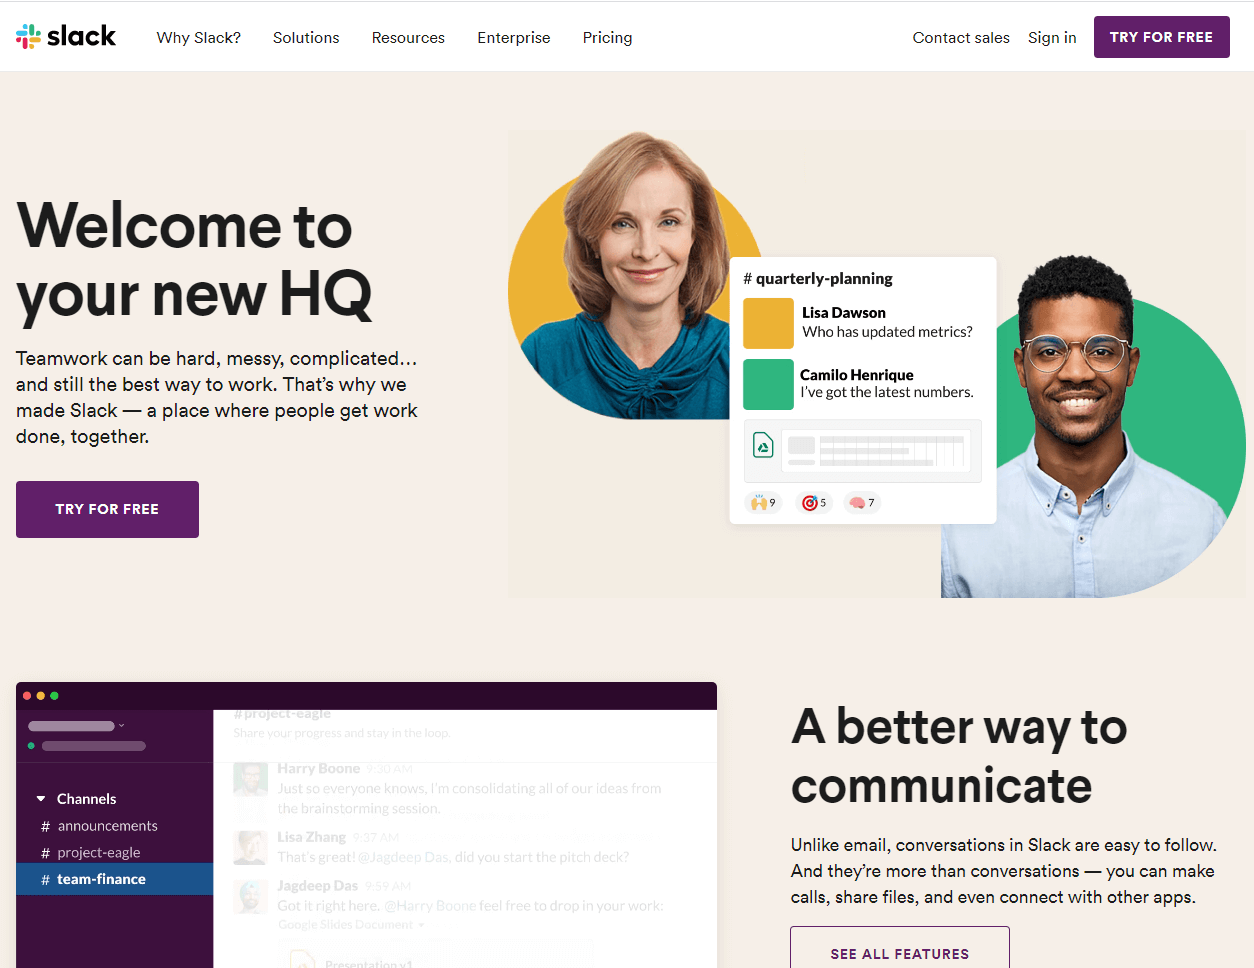 Slack's landing page including a CTA button and links to more information.